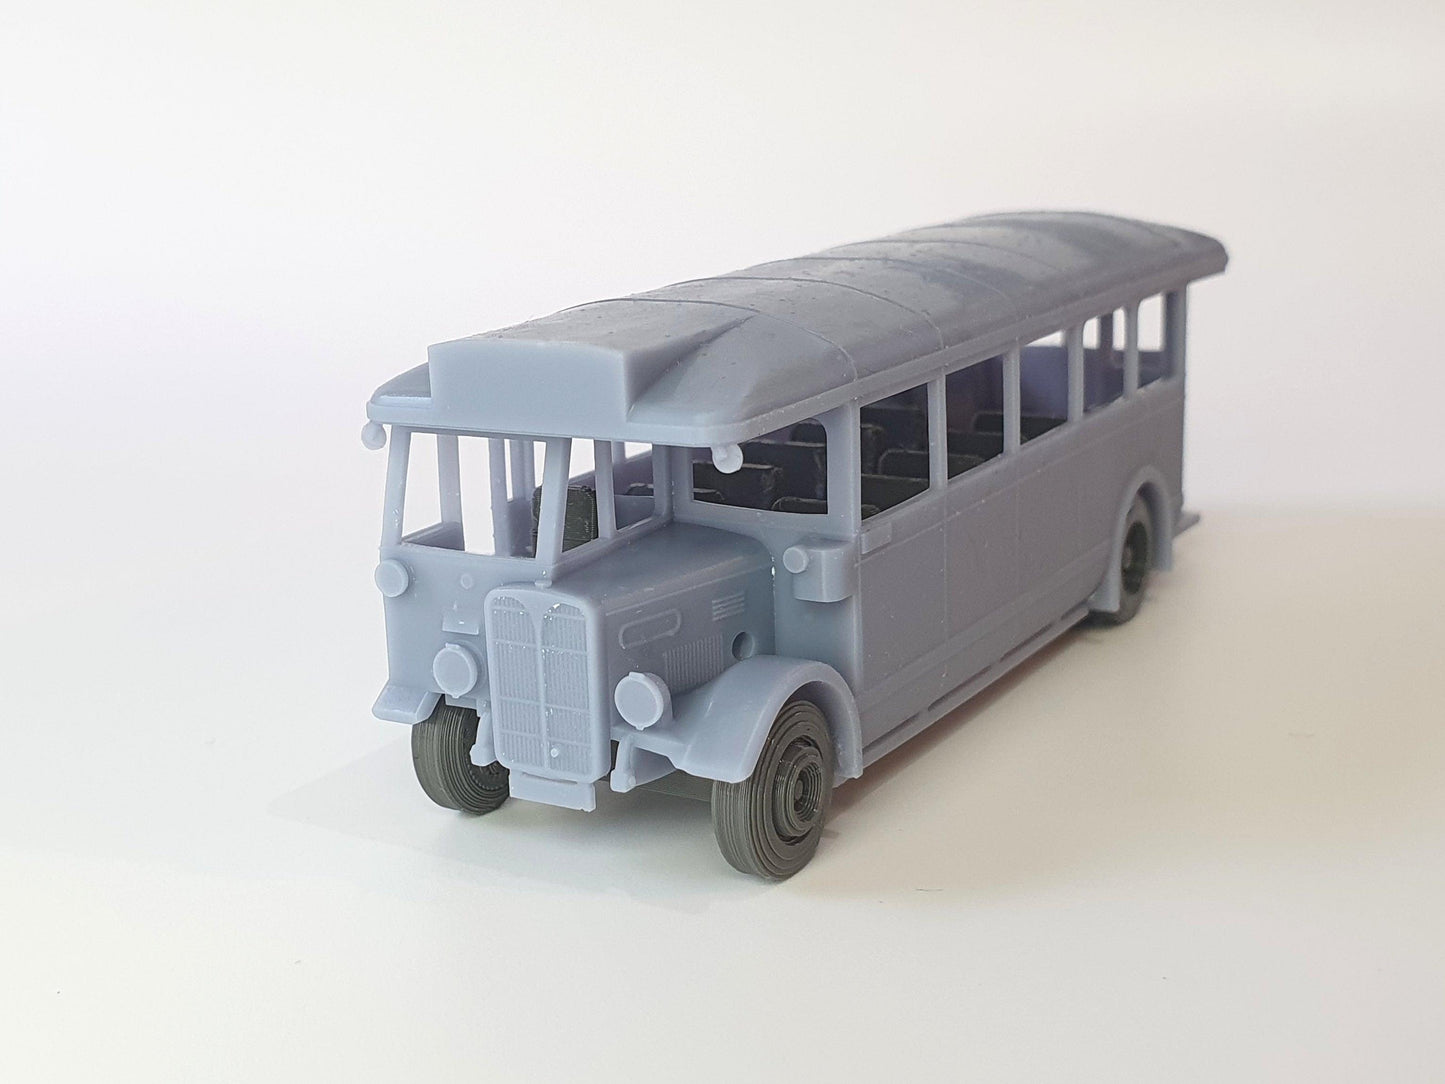 Front view of OO gauge scale model rear entrance country London 1T1 AEC Regal bus - Three Peaks Models